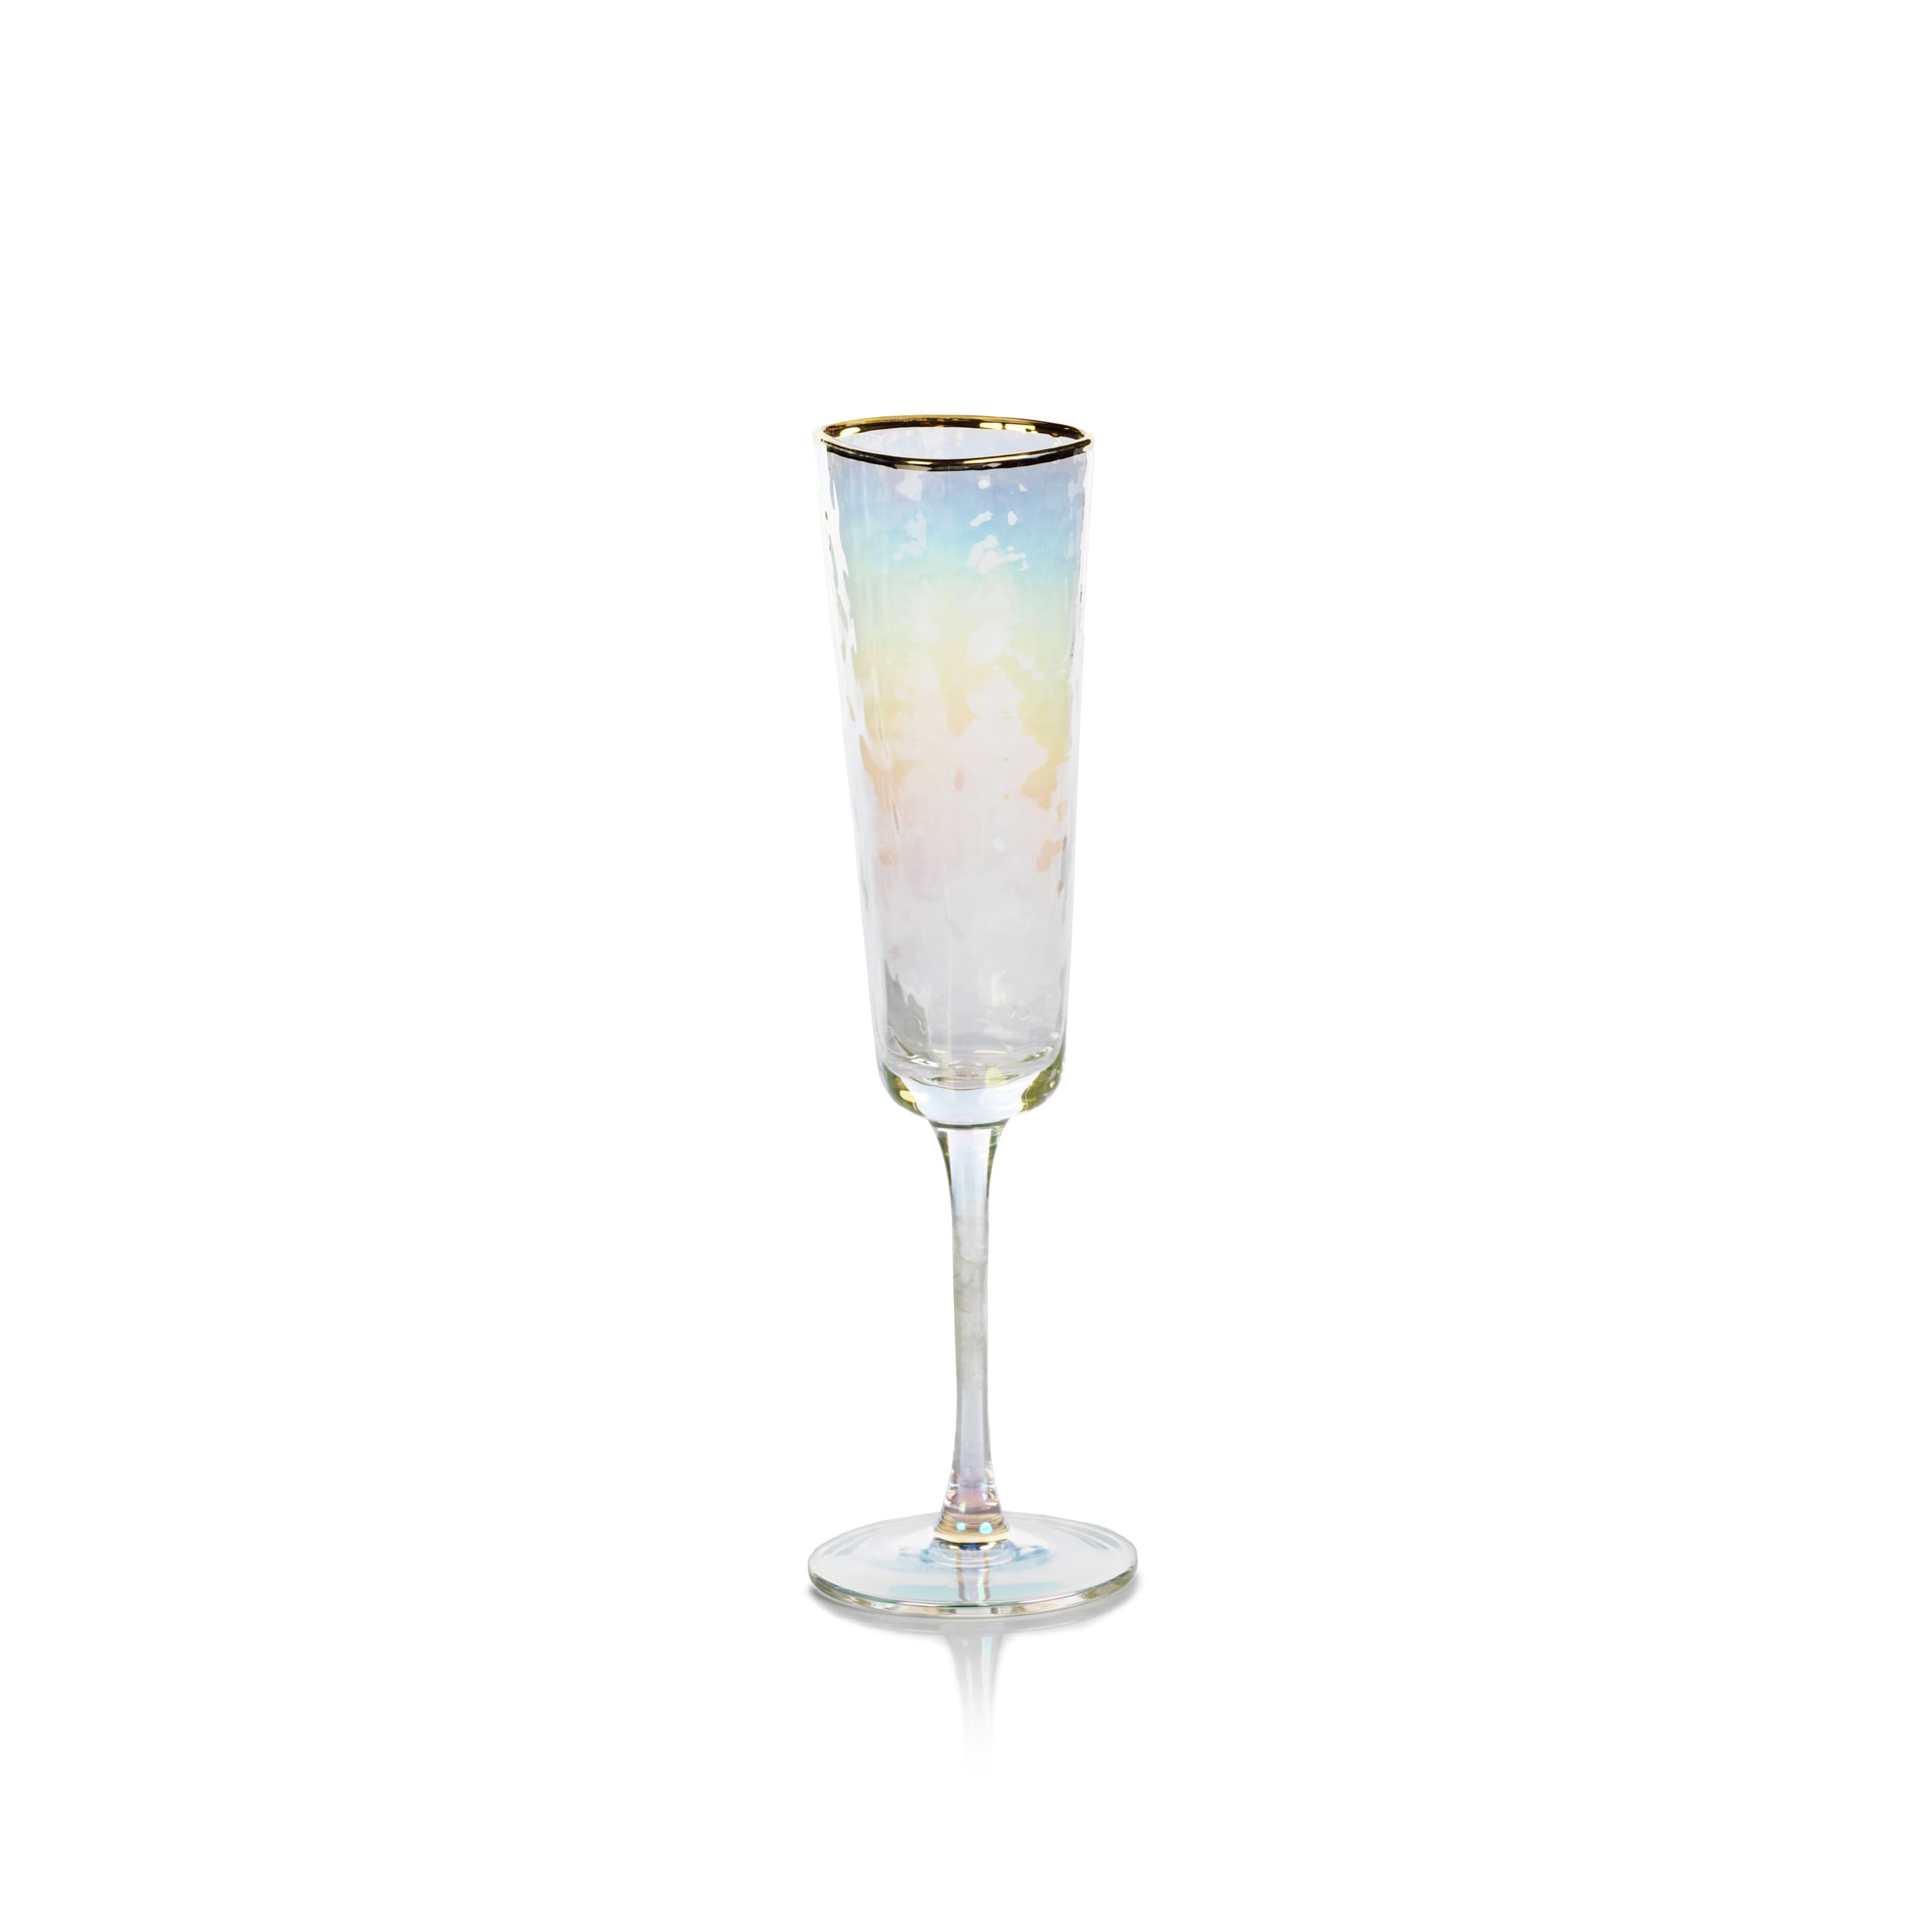 Crystal Champagne Flutes - Elegant Champagne Glasses, Hand Blown - Set of 4  Modern Champagne Flutes, 100% Lead Free Premium Crystal - Gift for